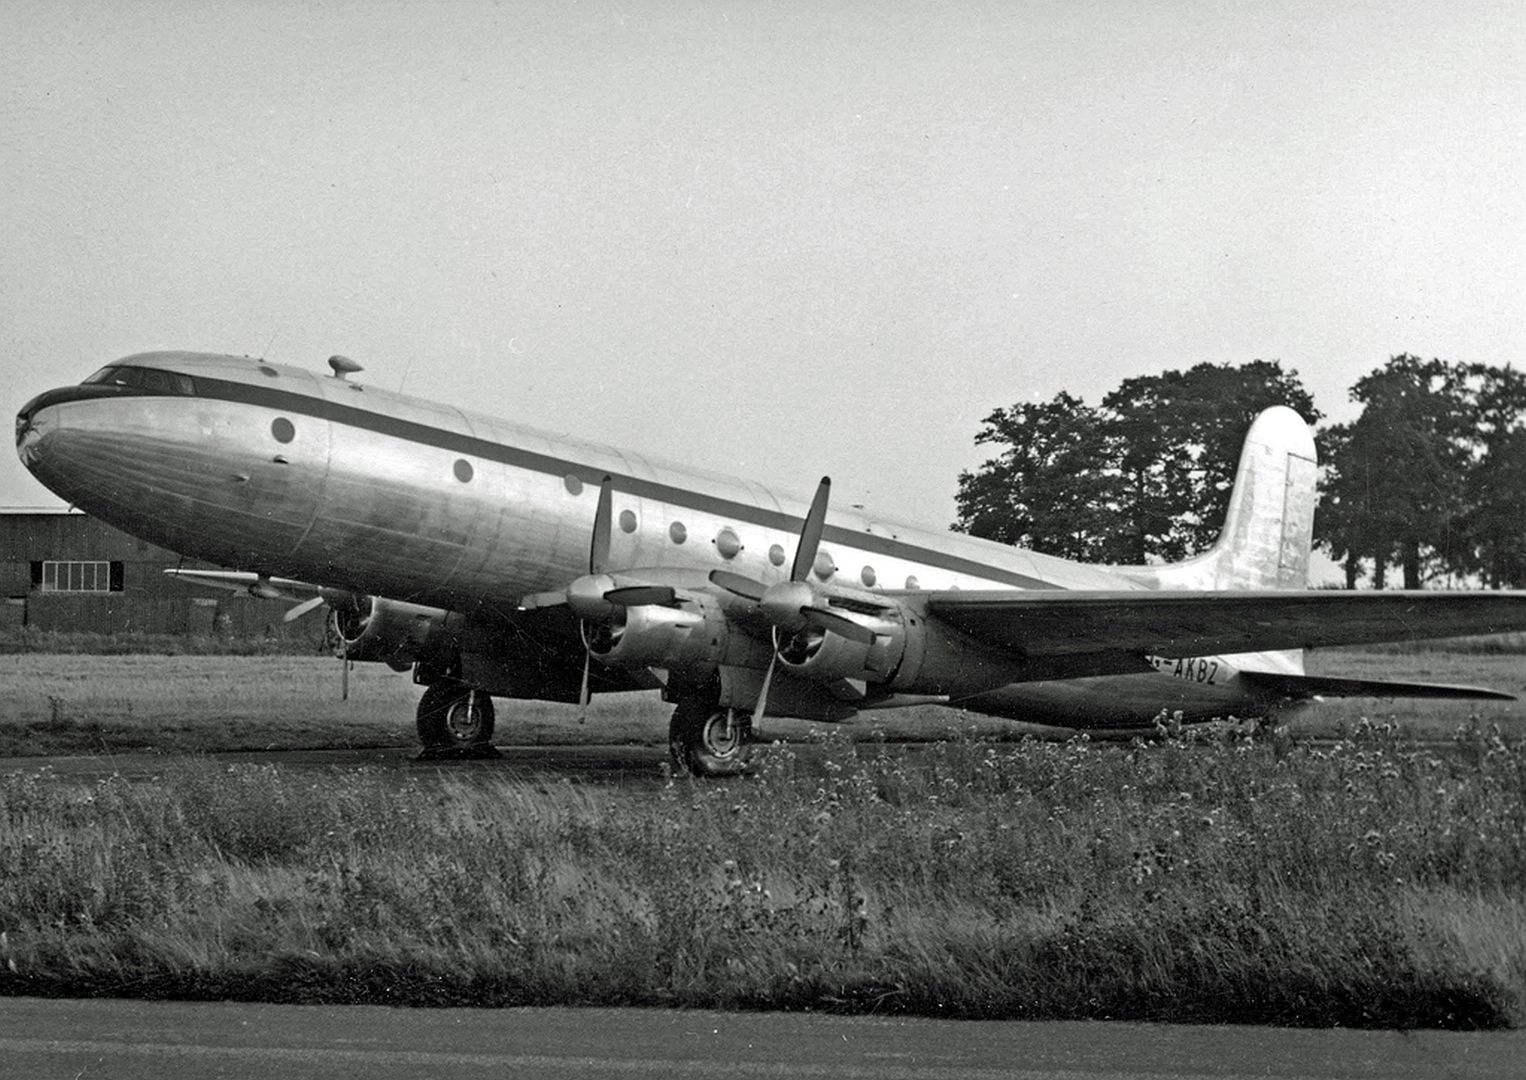 AKBZ Of BOAC In Storage At London Stansted In 1953